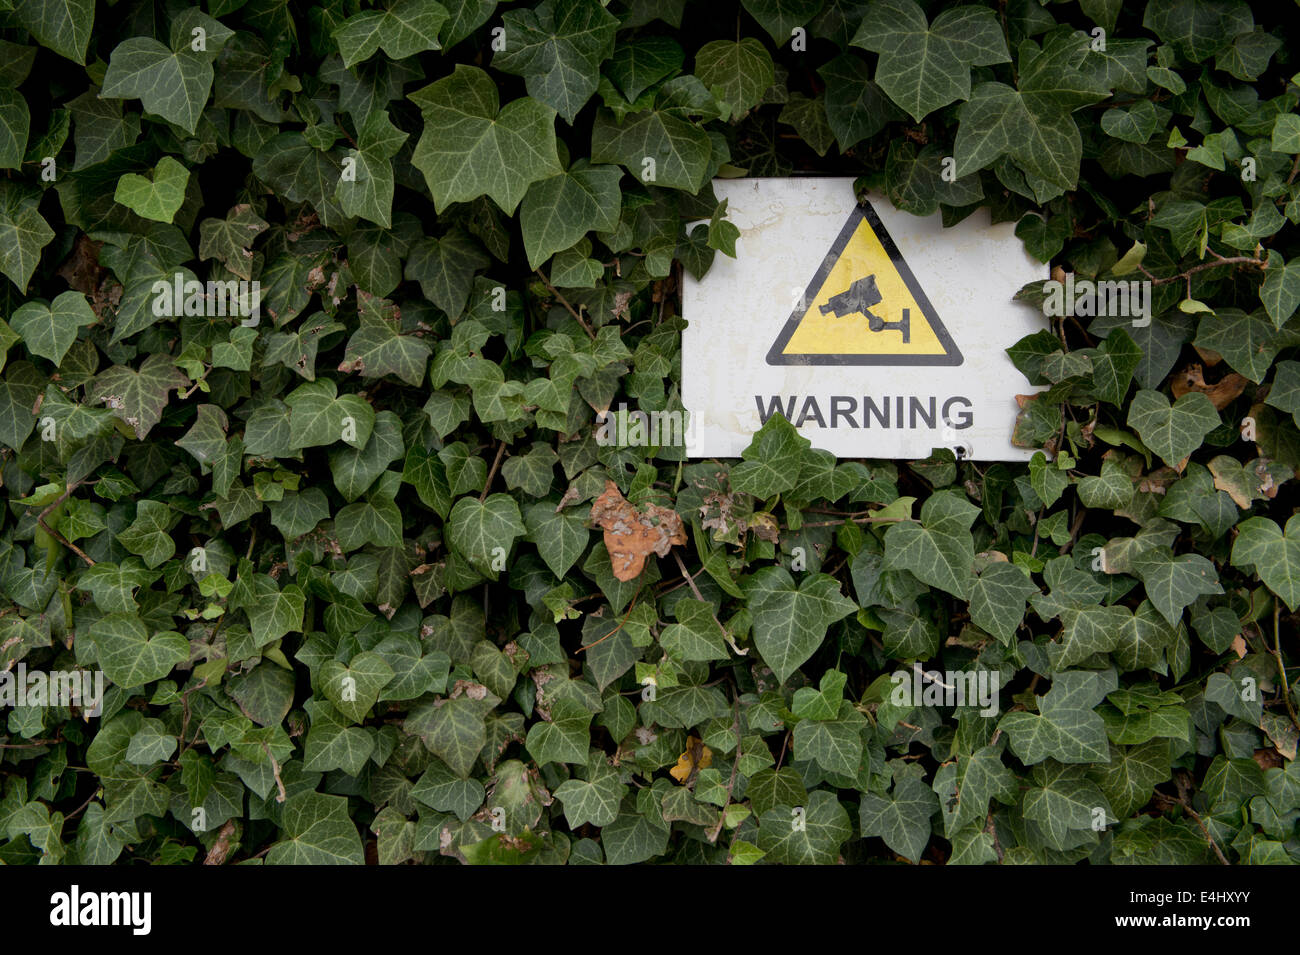 A warning sign indicating that CCTV is in operation in partially hidden behind some leaves in Manchester, UK. Stock Photo